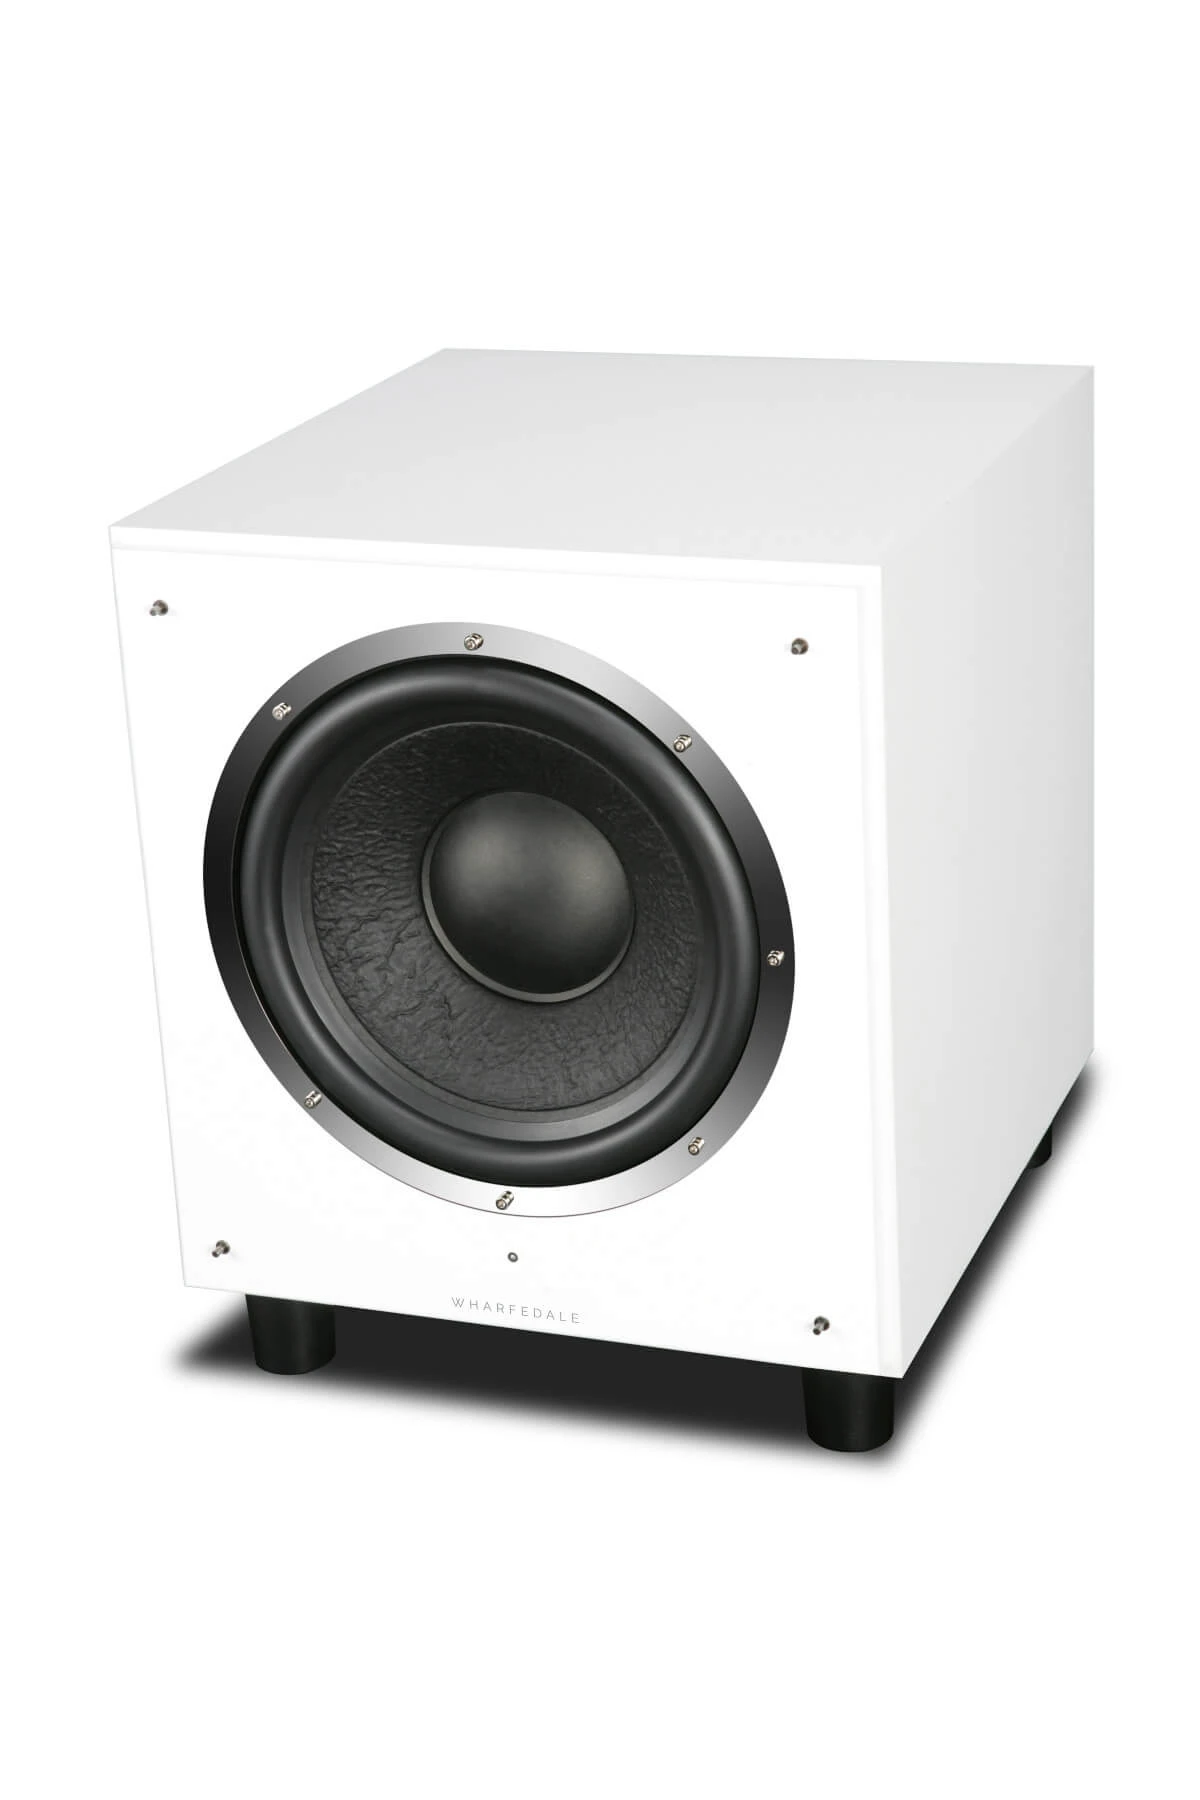 Wharfedale-SW-12-white-sandex-front